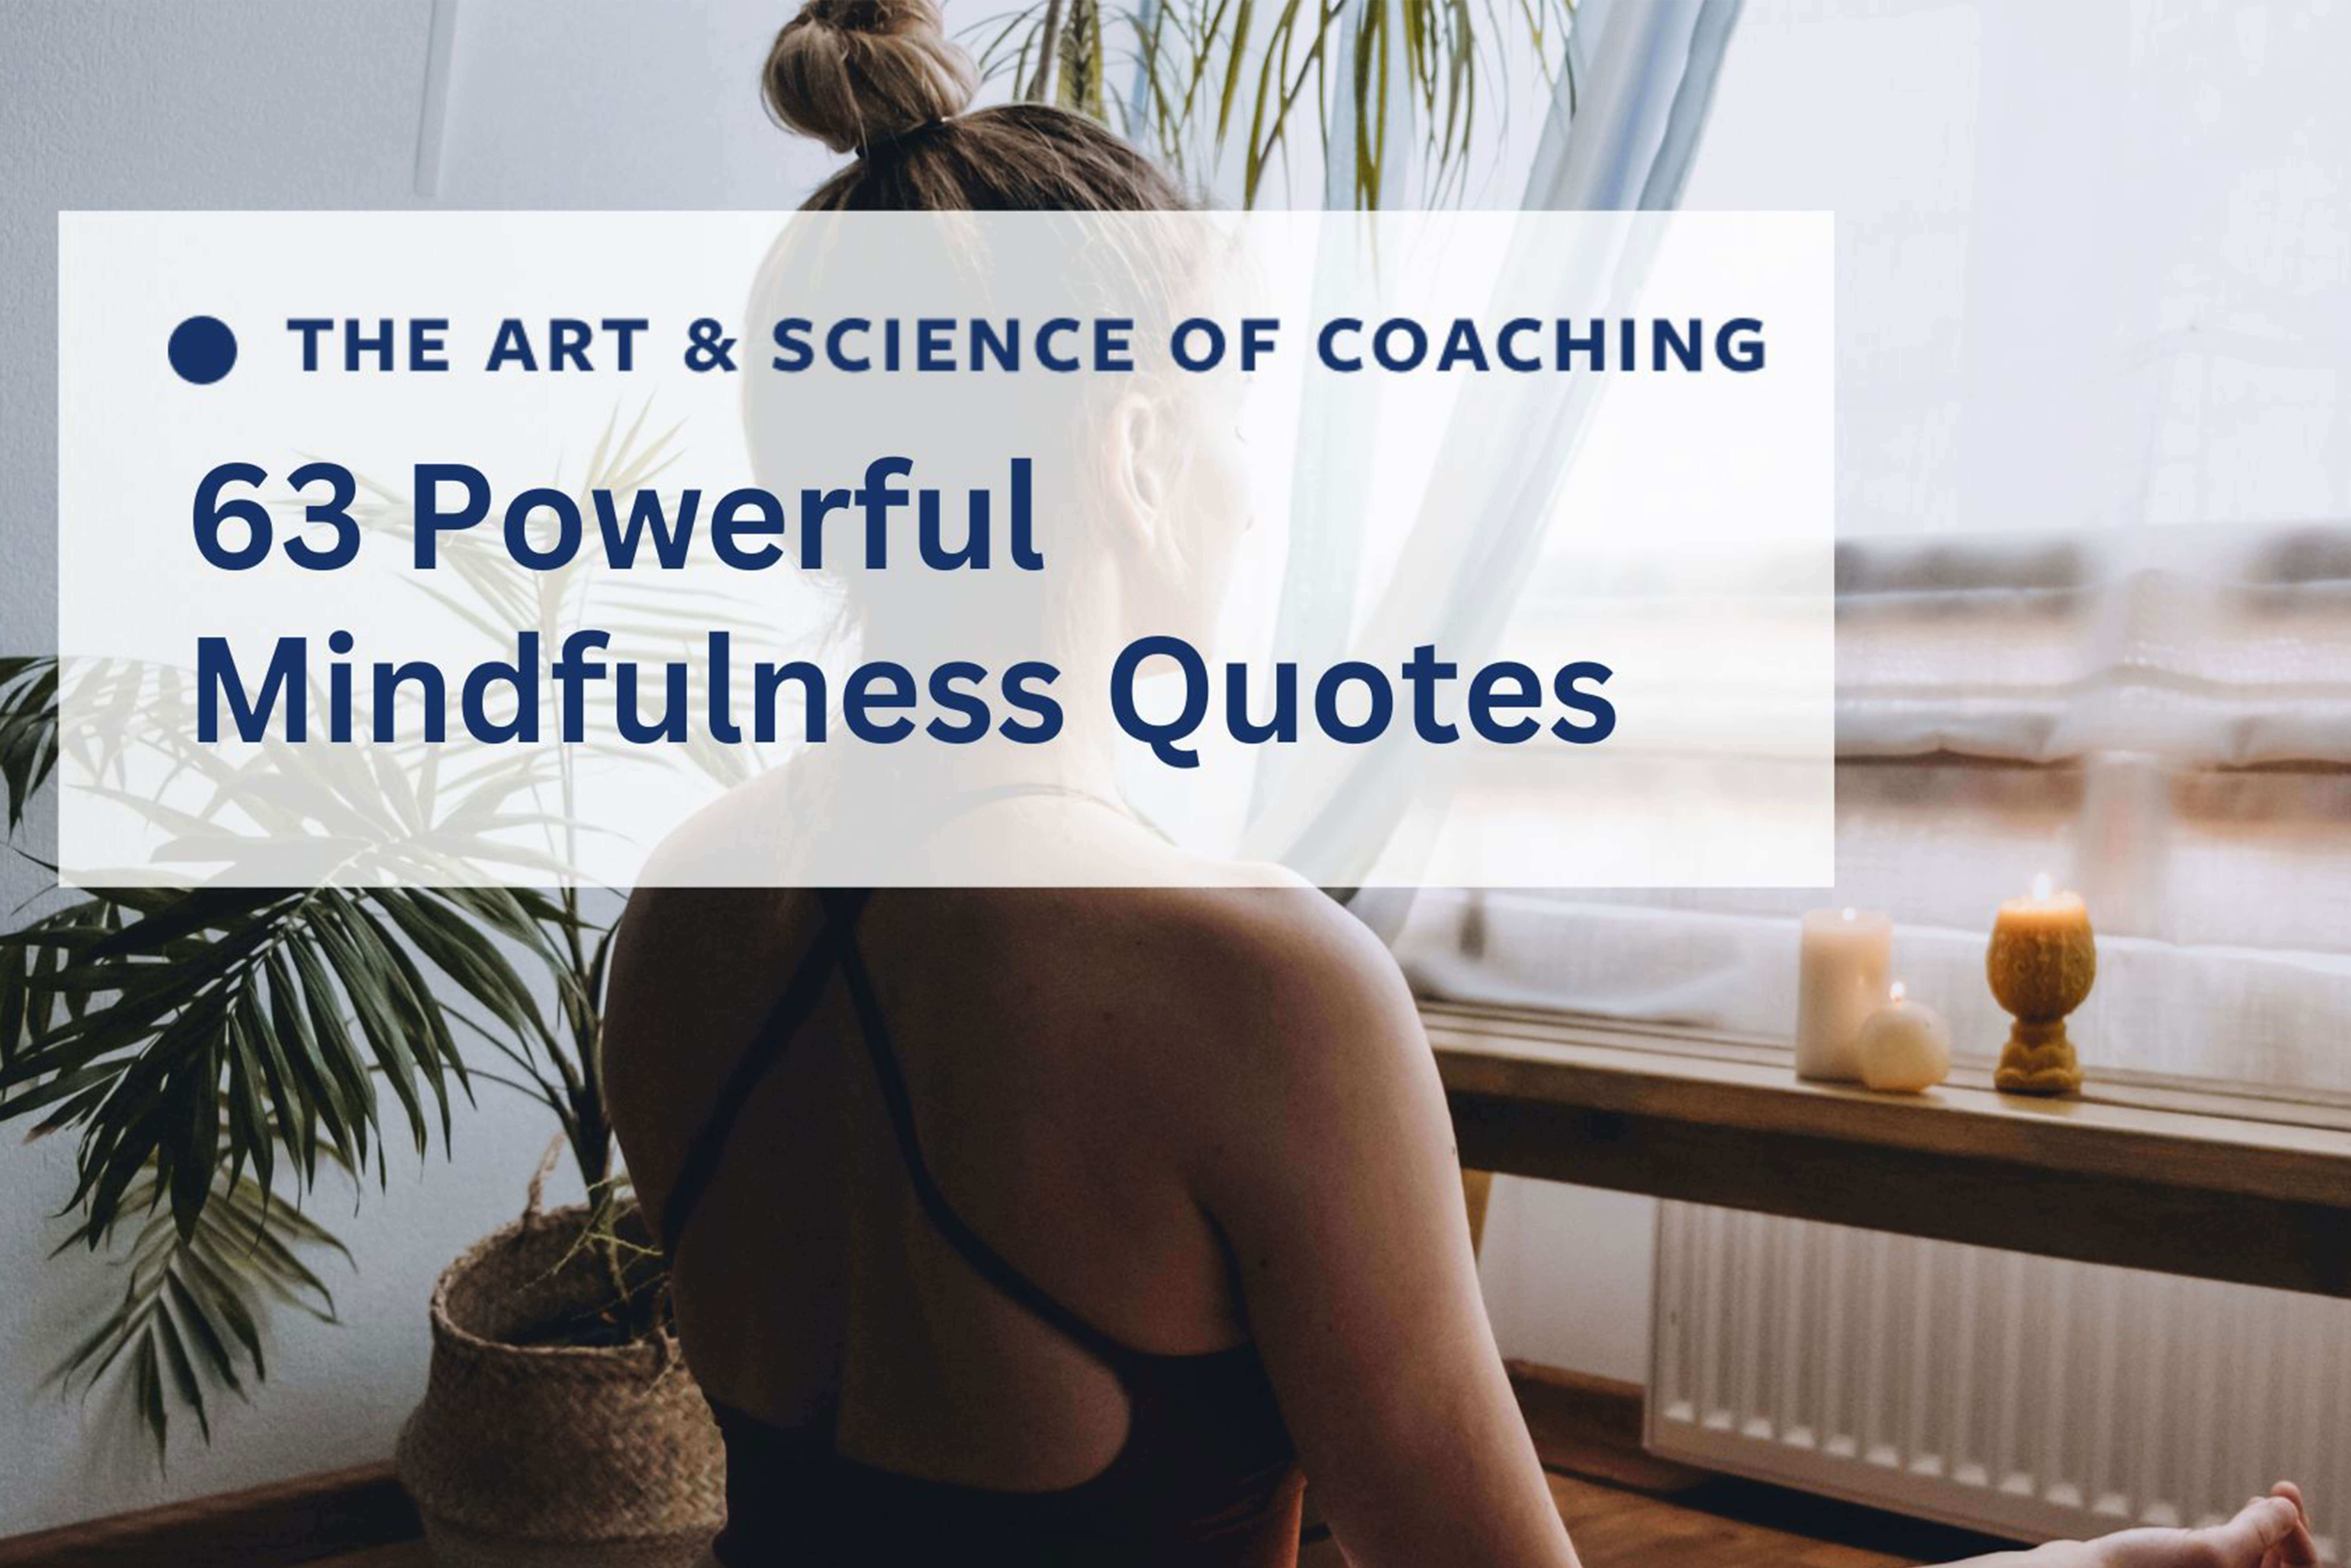 Mindfulness quotes have the power to inspire and motivate.